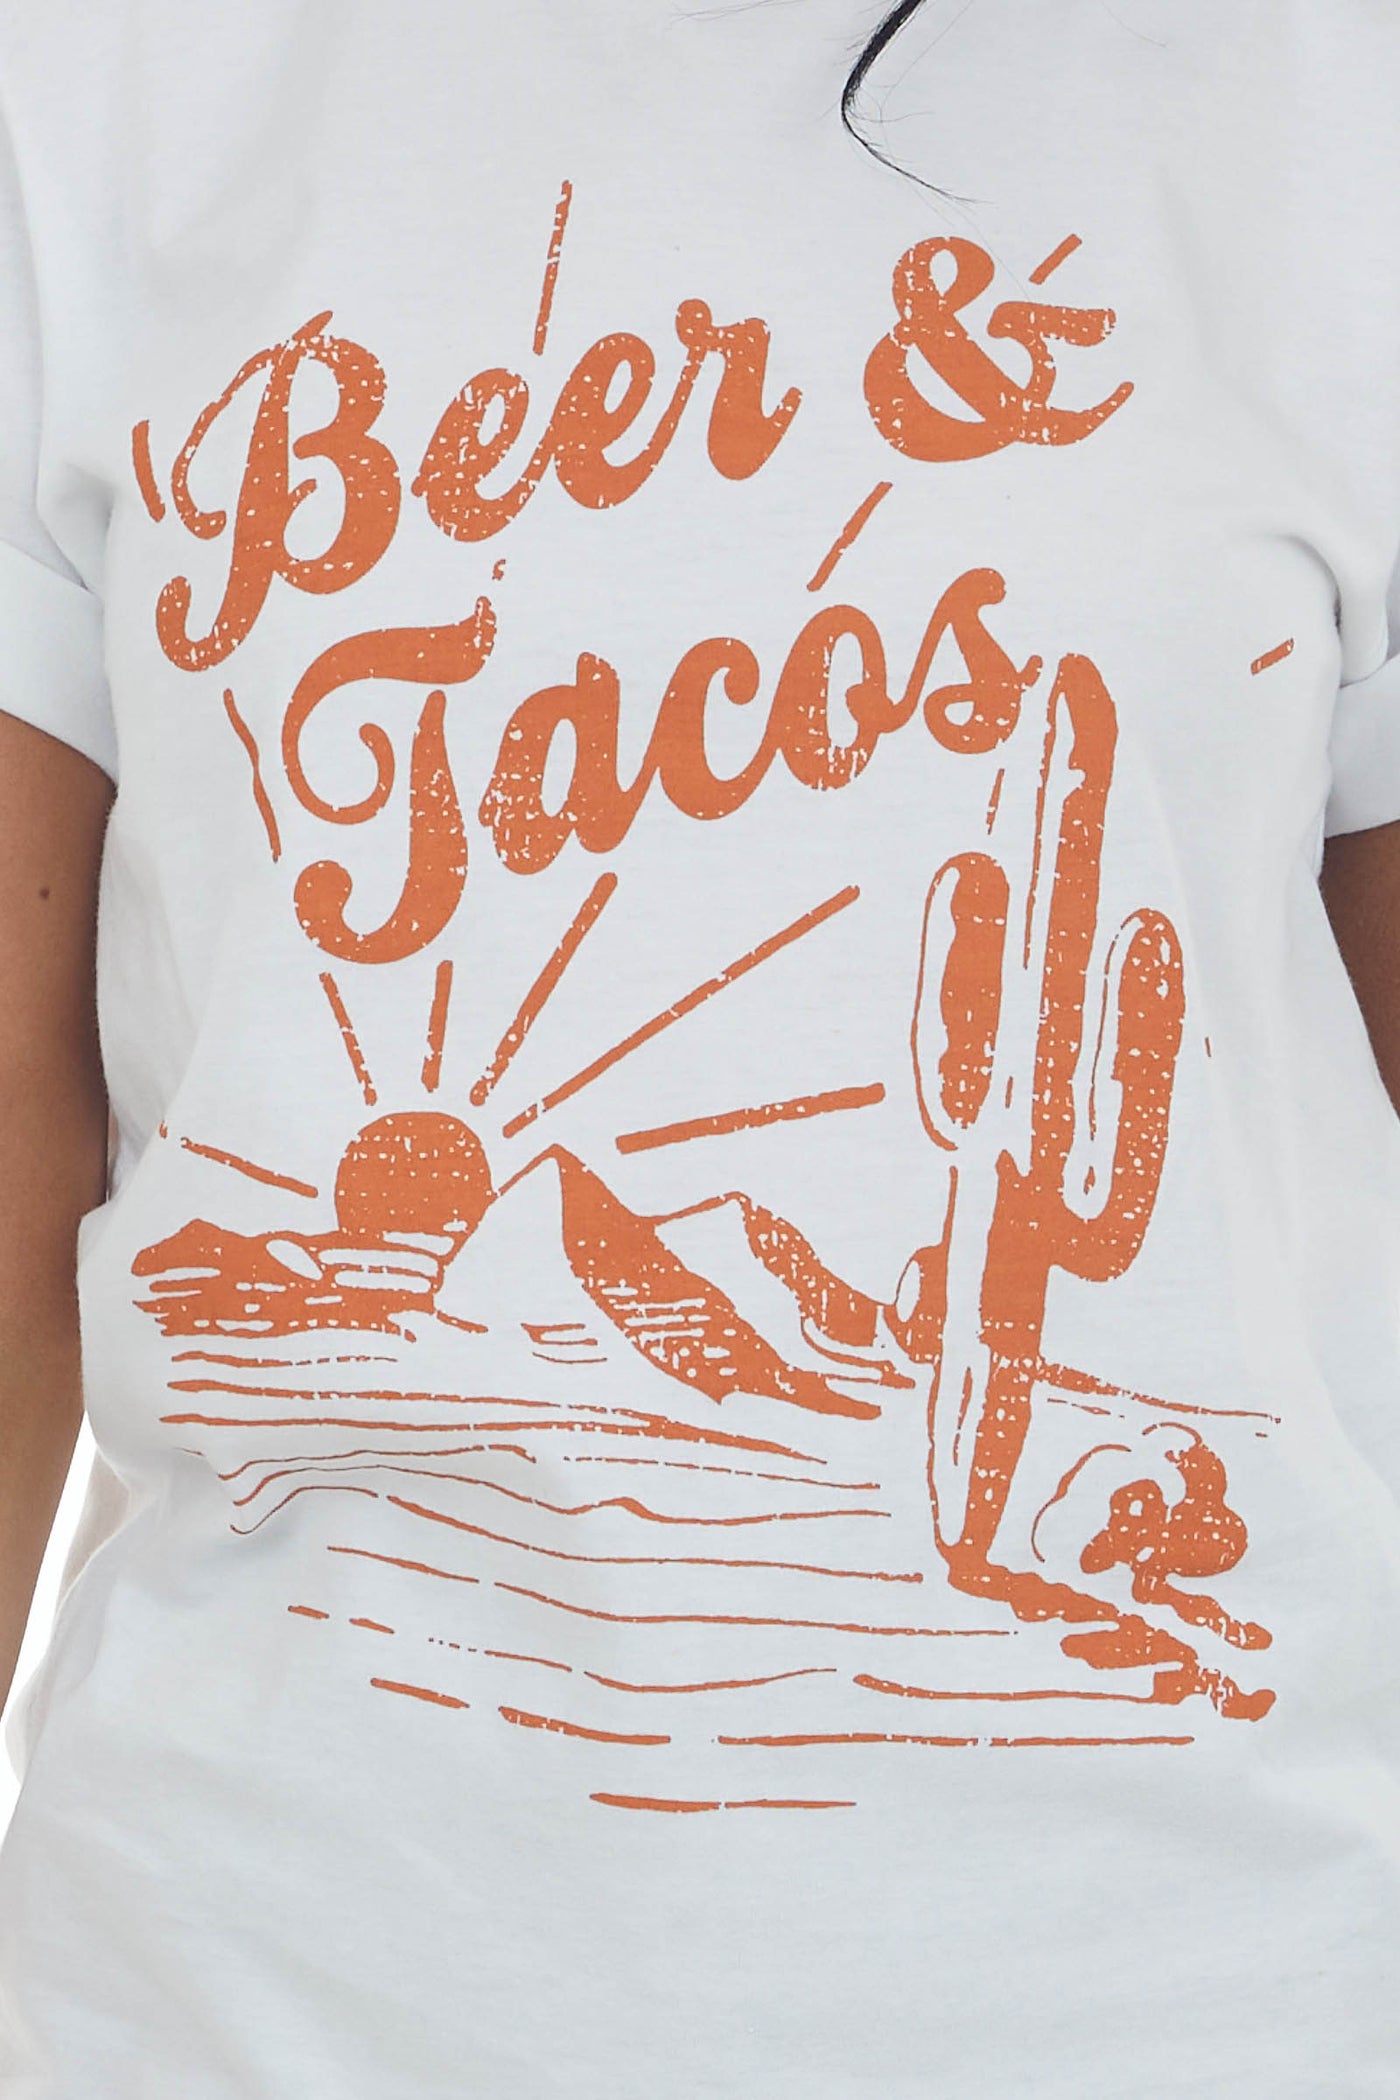 White 'Beer and Tacos' Desert Graphic Tee